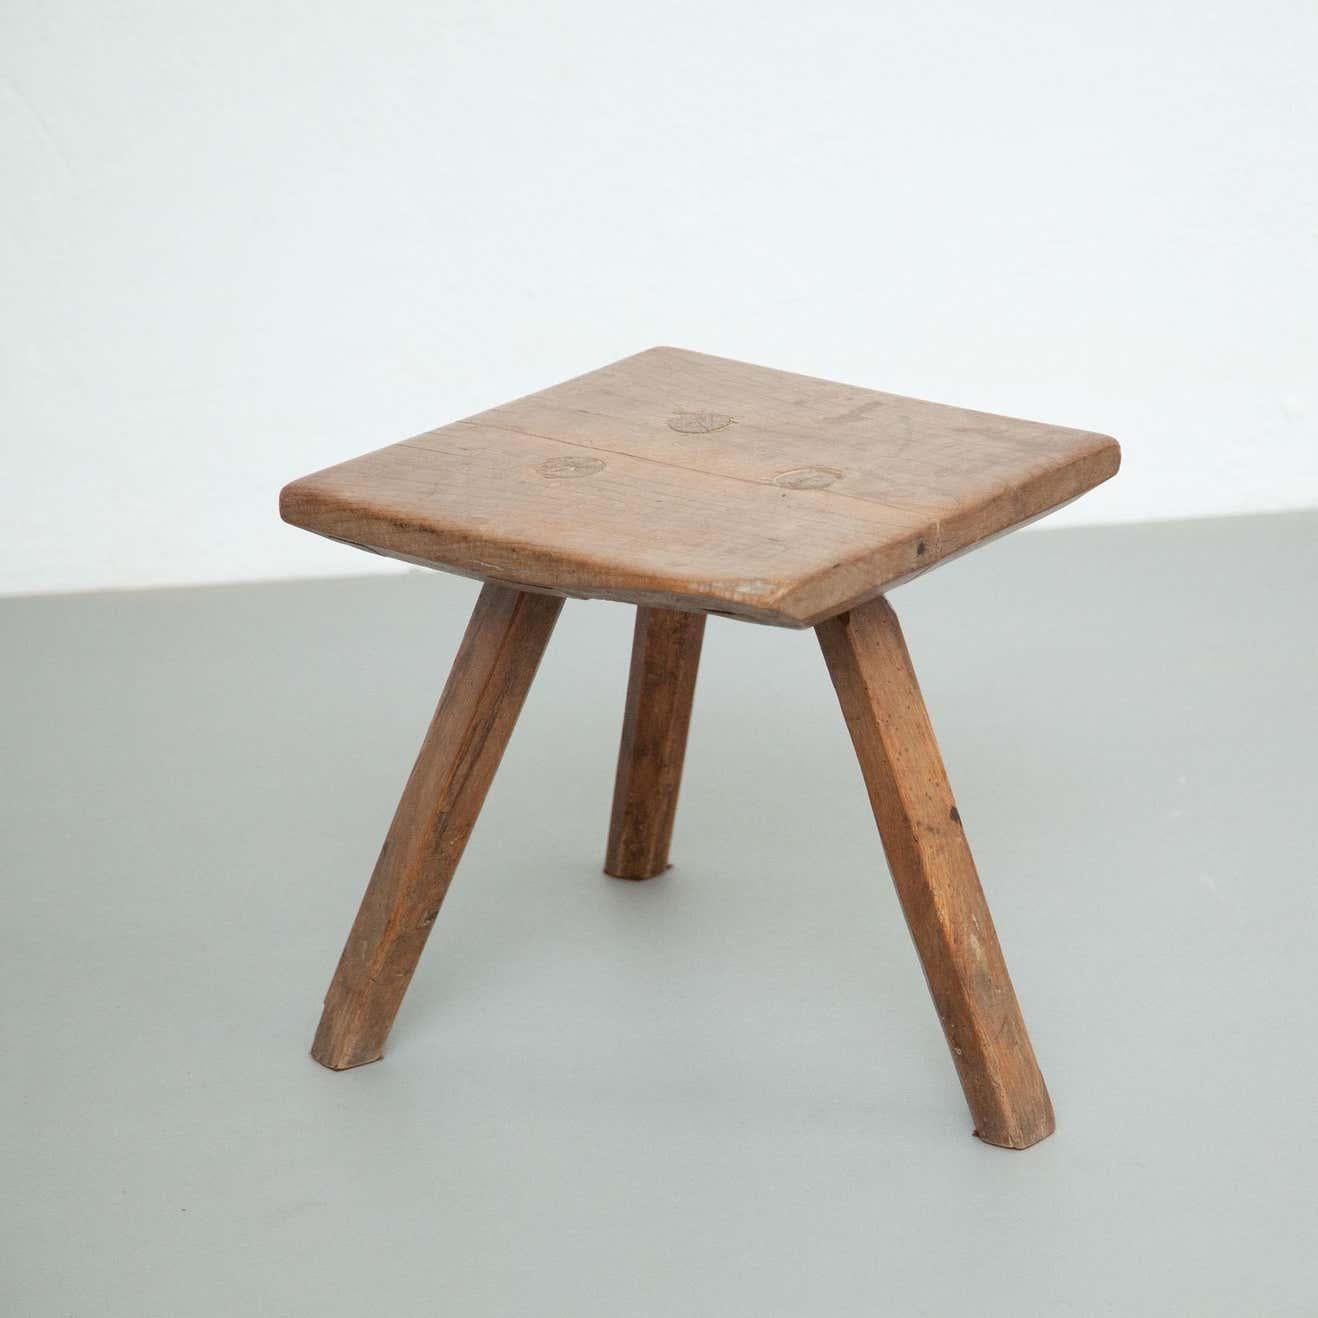 Rustic French stool.
By unknown manufacturer from France, circa 1930.

In original condition, with minor wear consistent with age and use, preserving a beautiful patina.

Material:
Wood.

